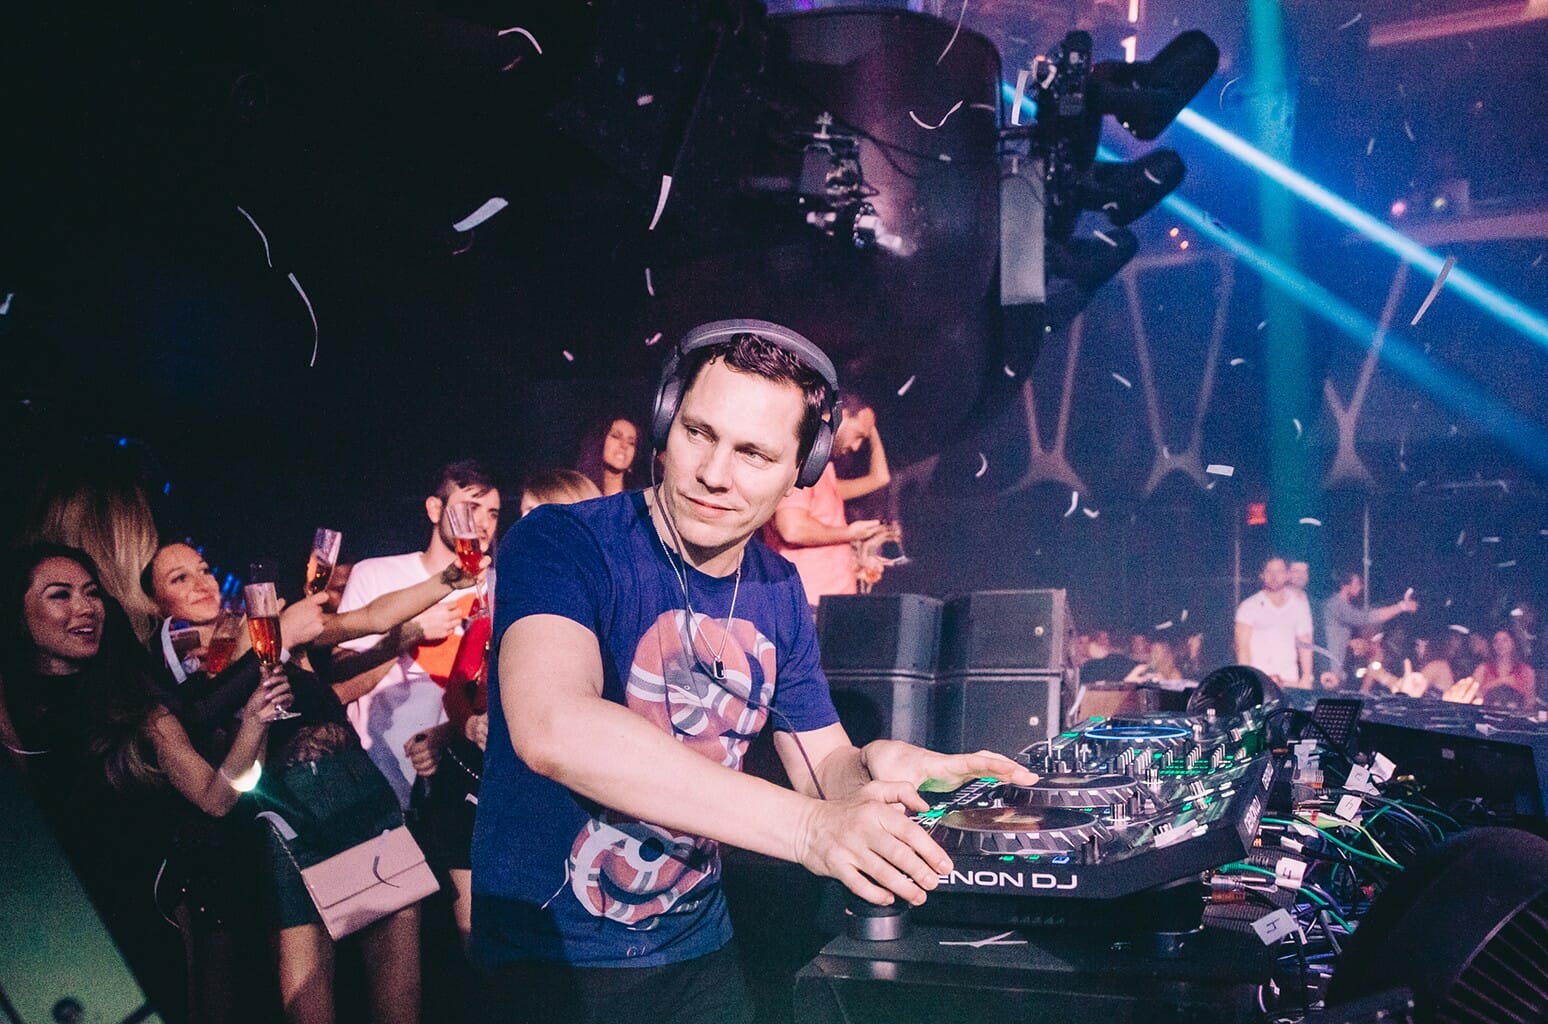 Tiësto continues 2021 hot streak with new 'Together Again' EP Dancing